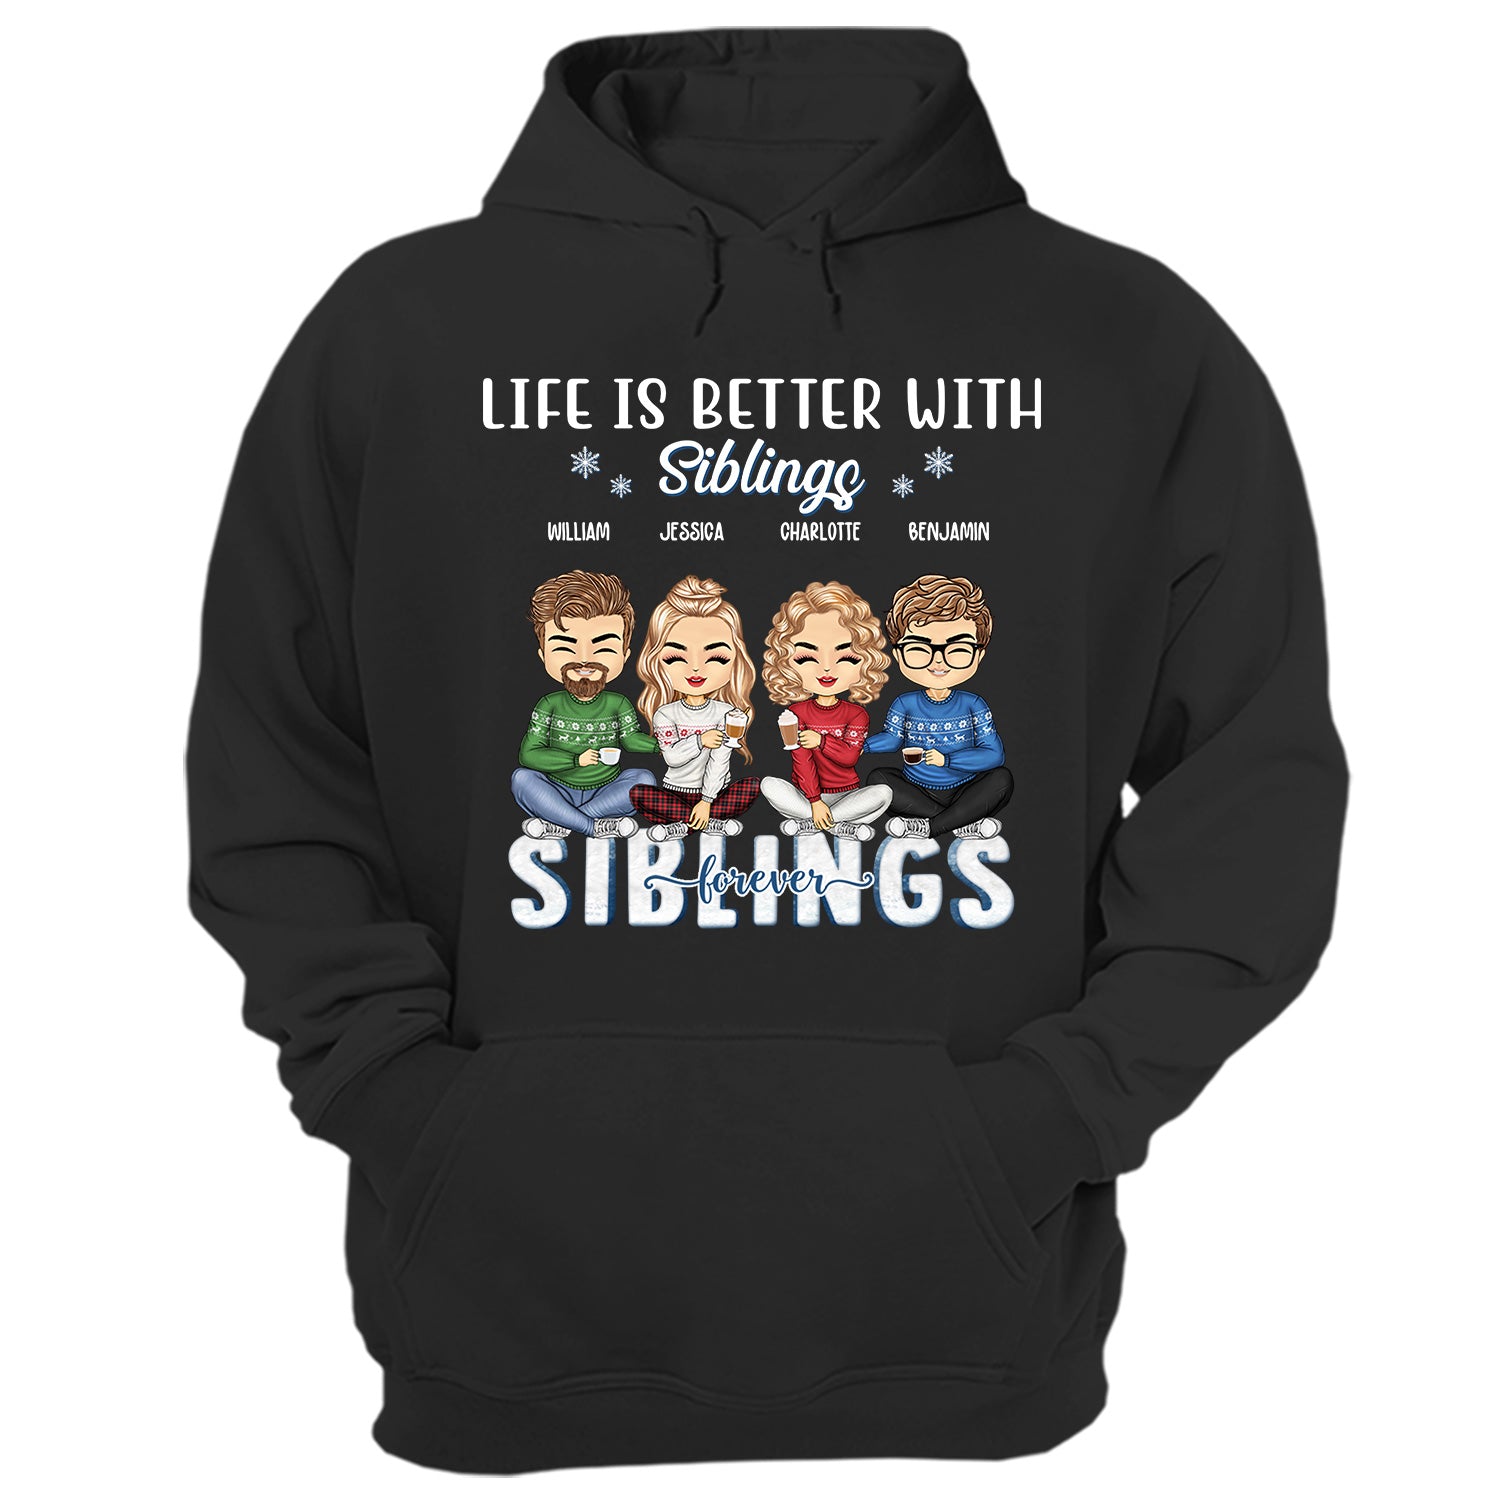 Life Is Better With Sisters & Brothers - Christmas Gift For Siblings And Best Friends - Personalized Custom Hoodie